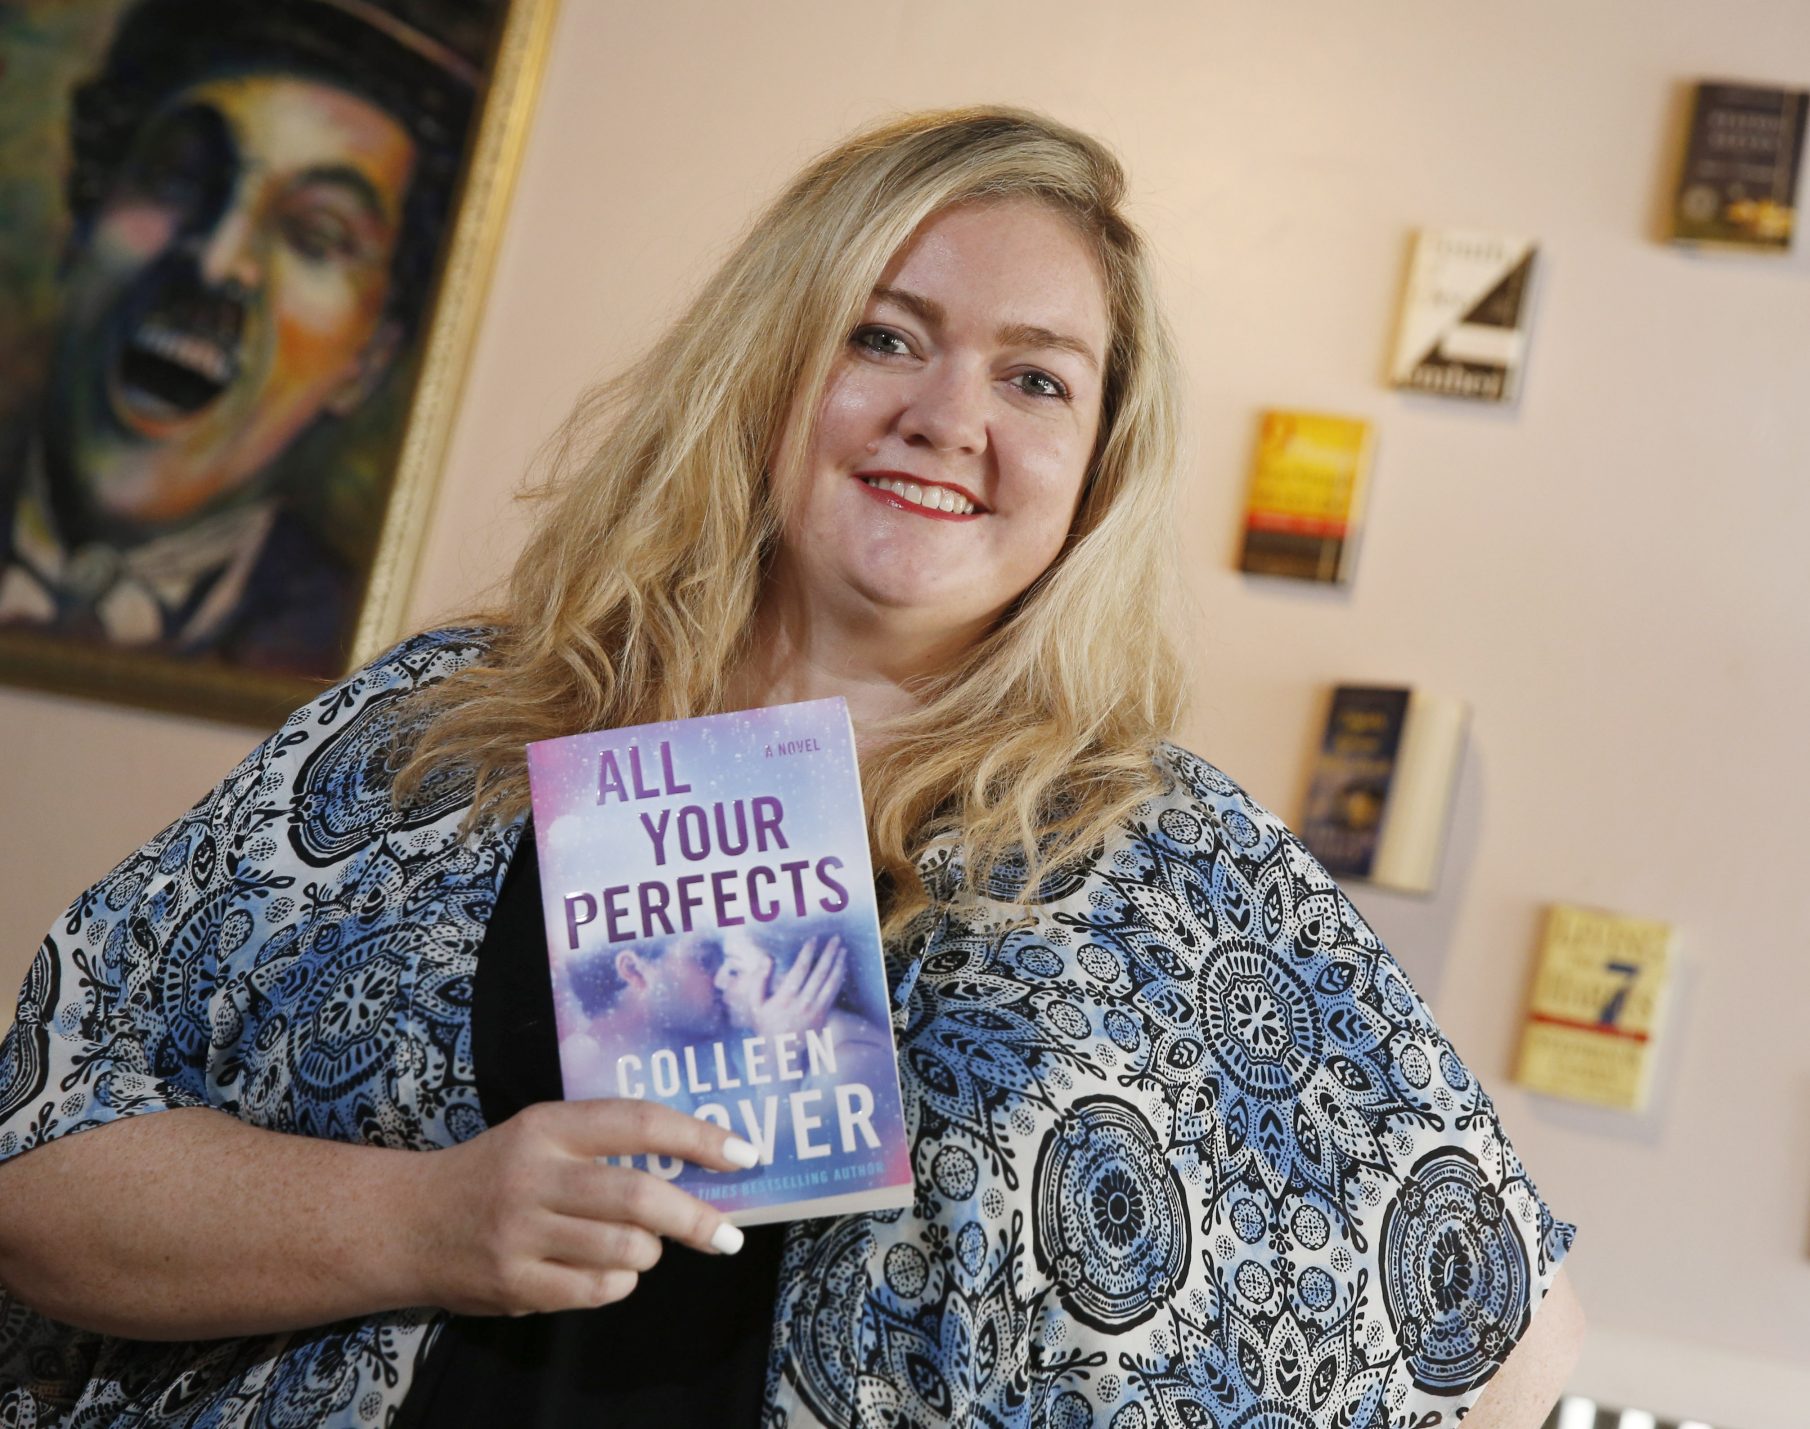 Colleen Hoover smiling and holding up her book "All Your Perfects"